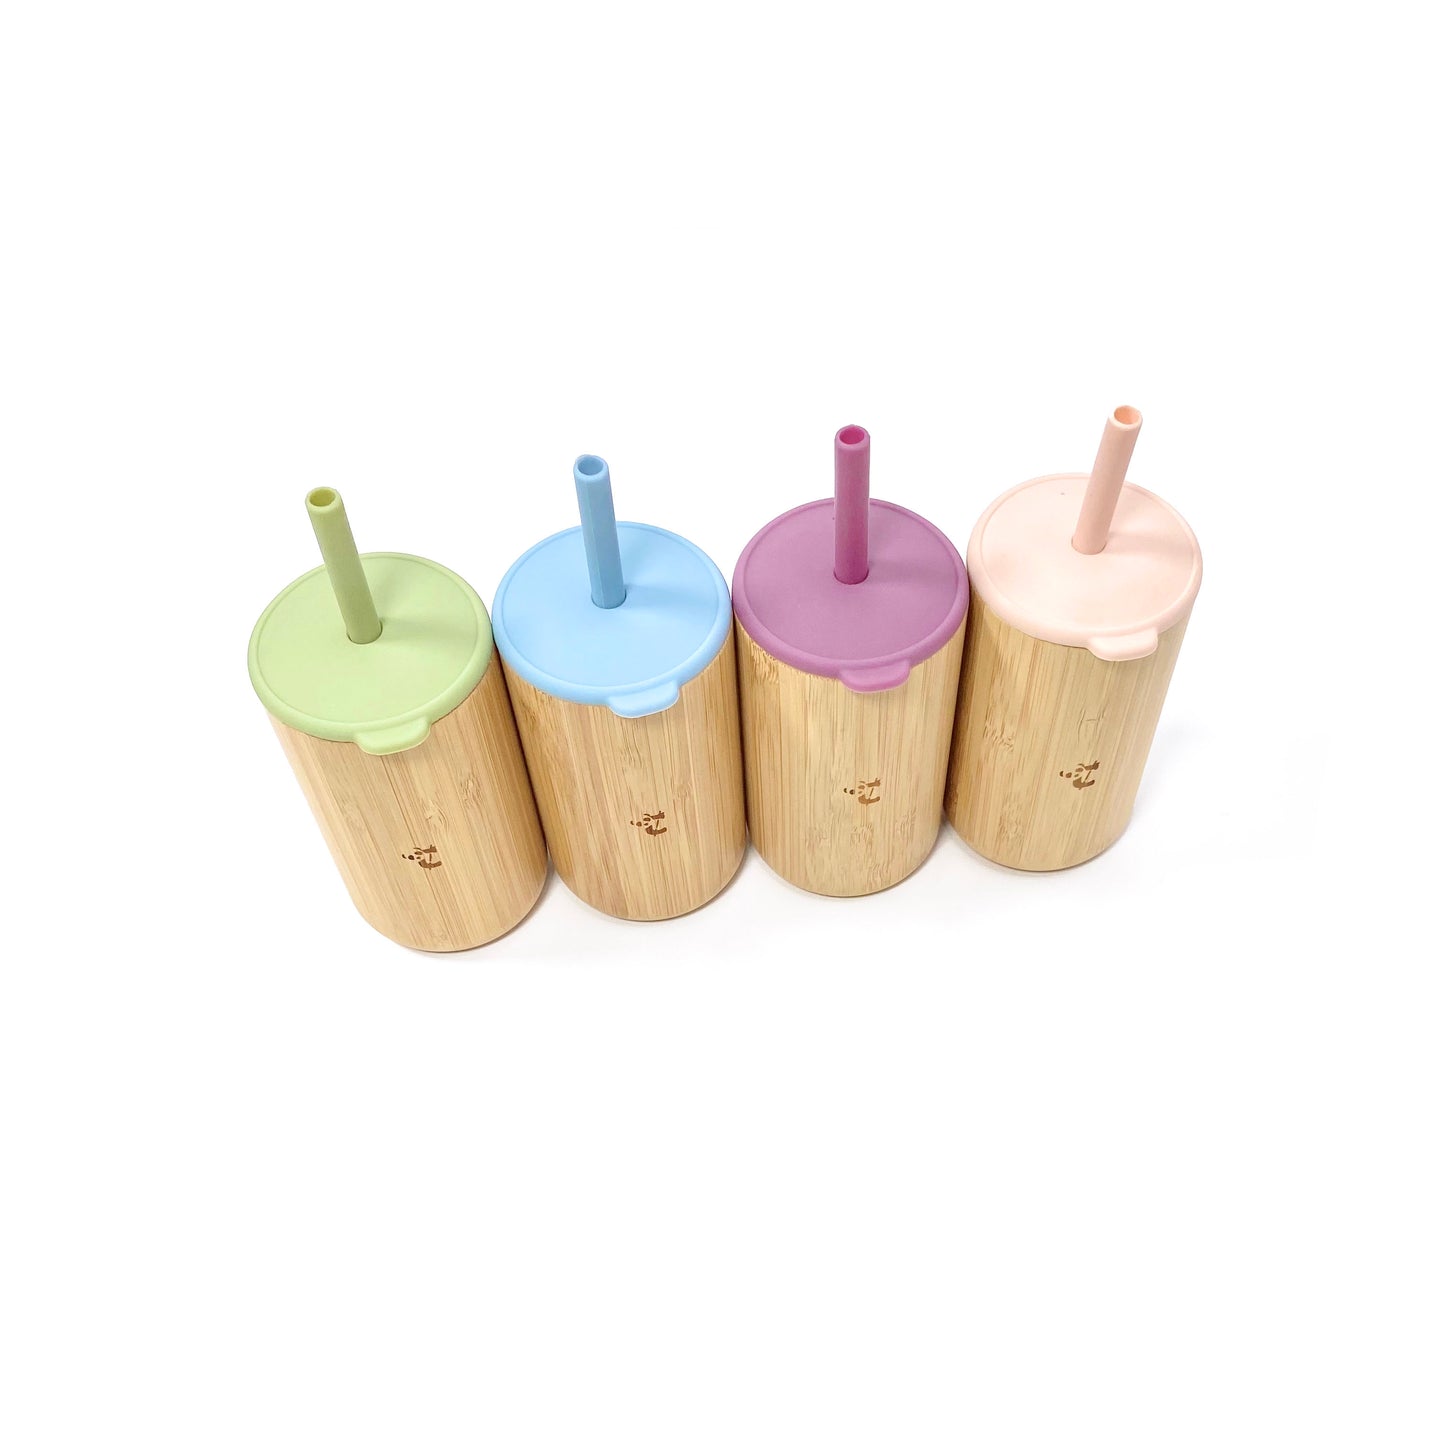 A collection of children’s bamboo drinking cups, with colourful silicone lids and matching straws. View shows the cups from above, arranged in a line diagonally, displaying the silicone lids and straws. 